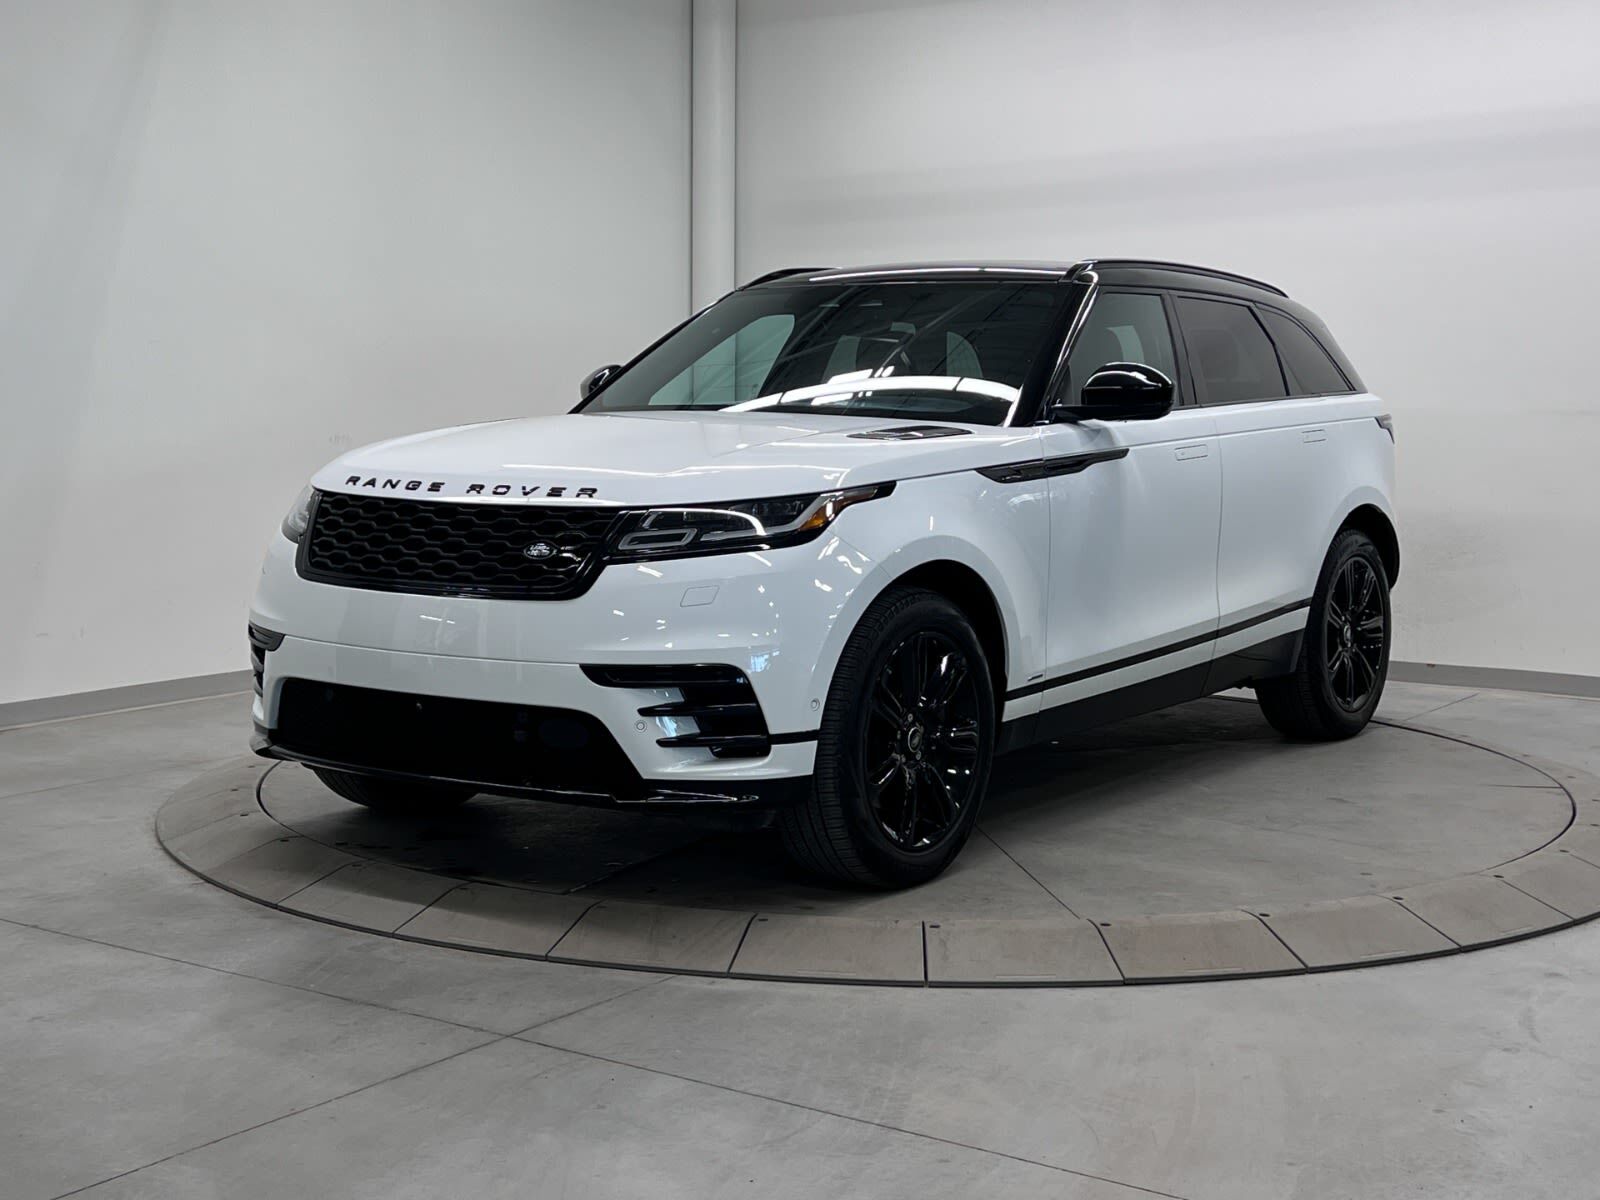 2021 Land Rover Range Rover Velar CERTIFIED PRE OWNED RATES AS LOW AS 4.99%